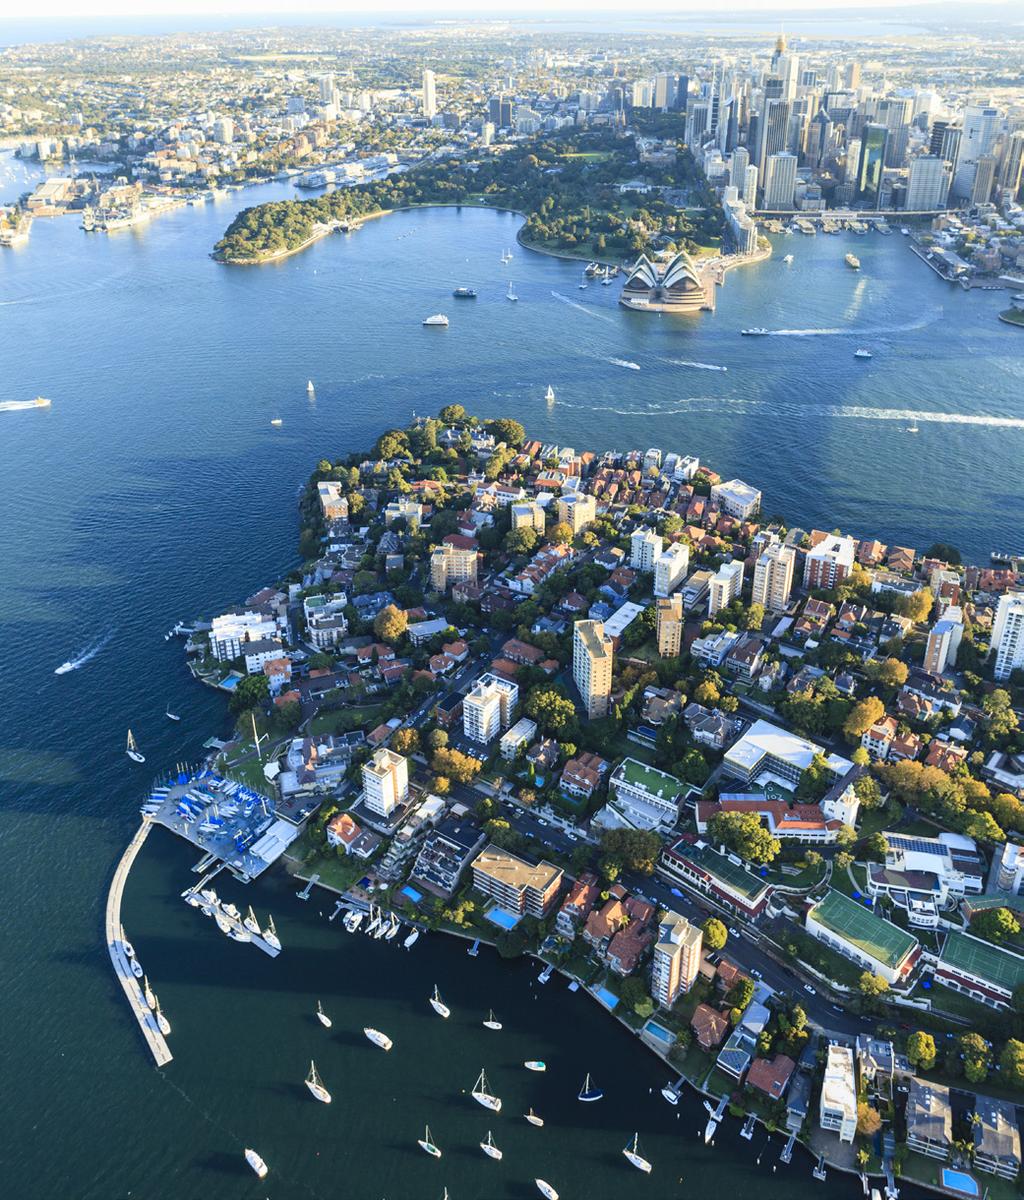 Sydney, Australia ket Report - August 218 Future Additions to Supply Some new hotels and serviced apartments to open in Sydney in the coming year include the Four Points By Sheraton Sydney Central